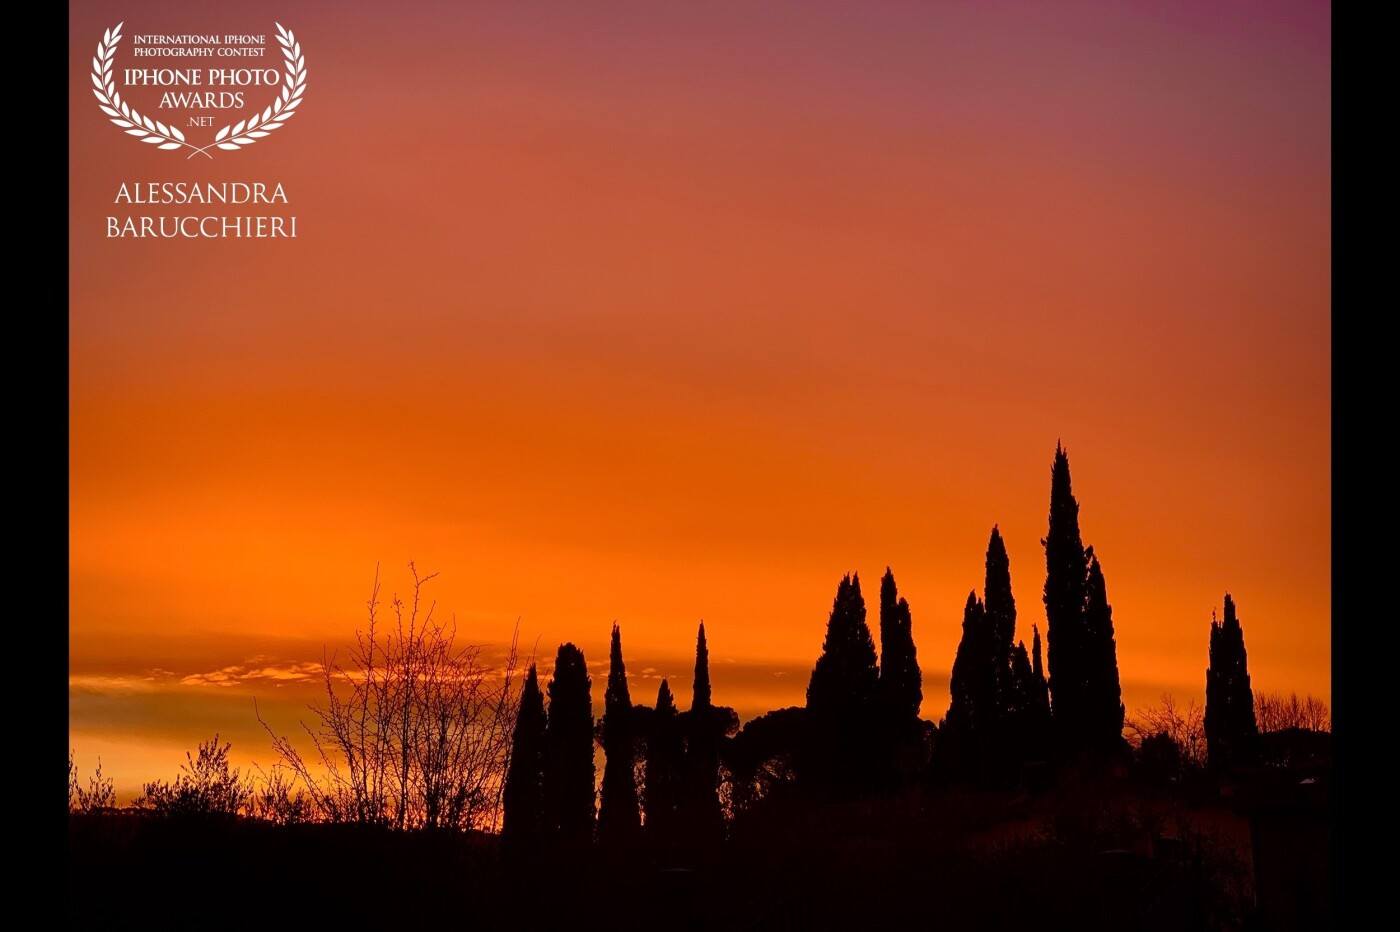 Tuscany, Italy<br />
The cypresses typical of the Tuscan countryside become poetic silhouettes against the intense red of a beautiful sunset<br />
I cipressi tipici della campagna toscana si diventano poetiche silhouette contro il rosso intenso di un bellissimo tramonto<br />
